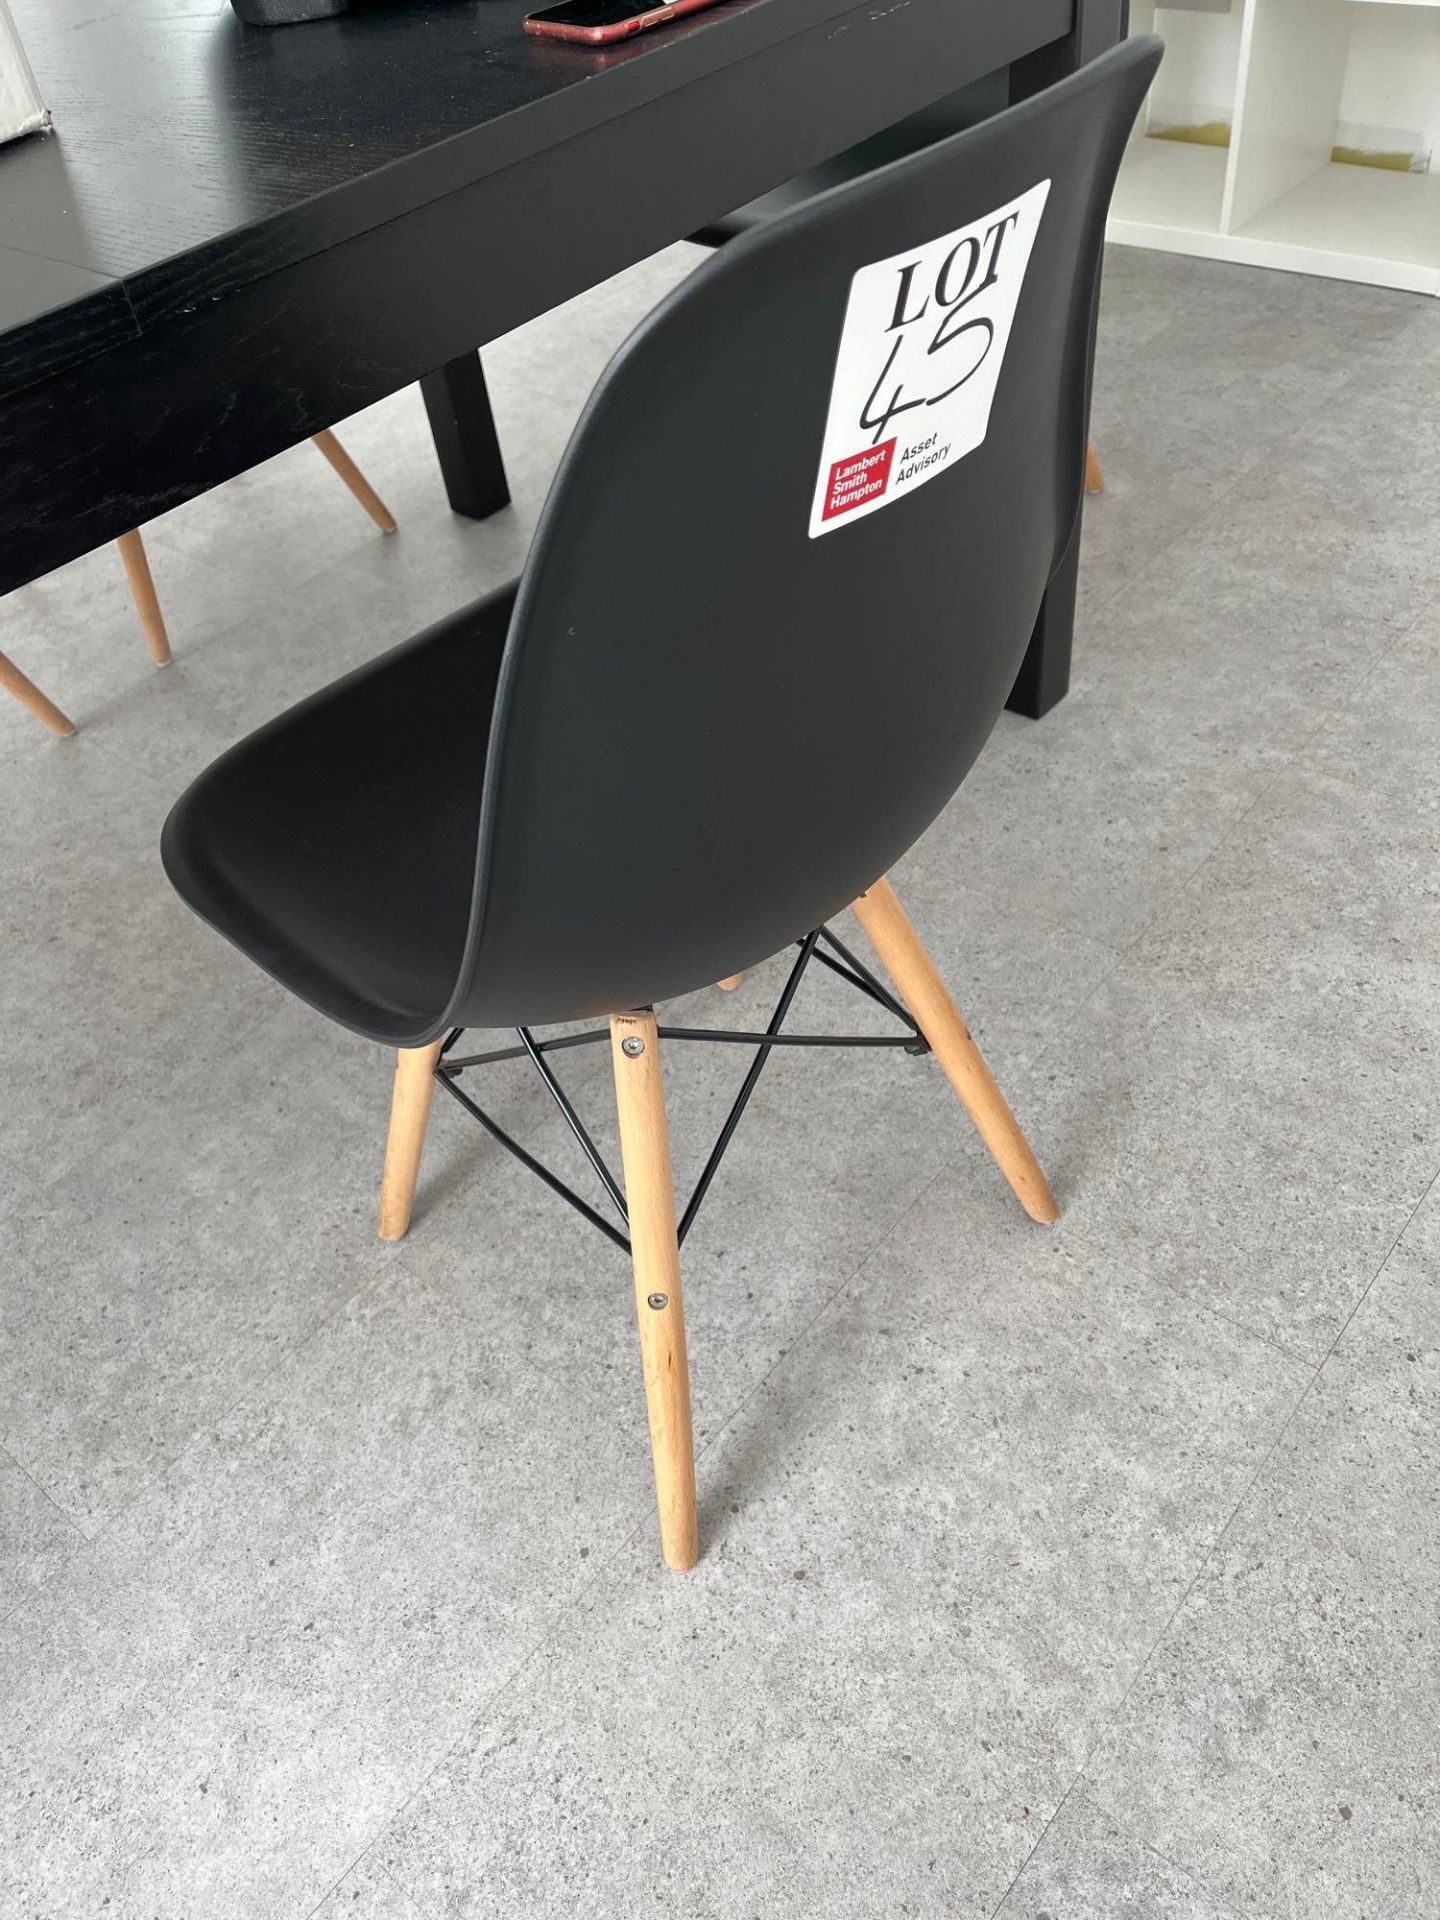 Four black plastic dining chairs with light wood legs - Image 3 of 4